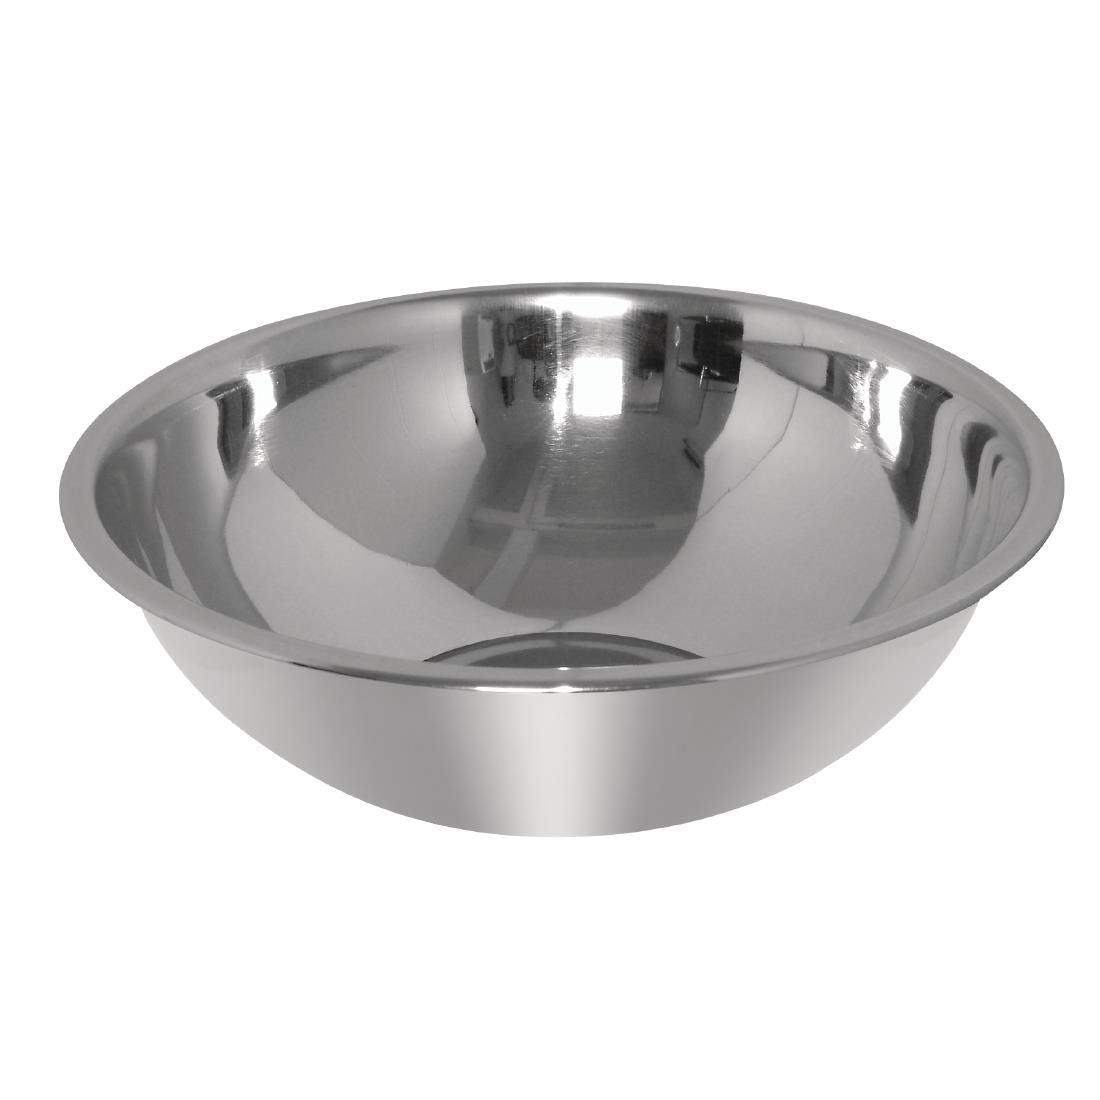 GC135 Vogue Stainless Steel Mixing Bowl 2.2Ltr JD Catering Equipment Solutions Ltd